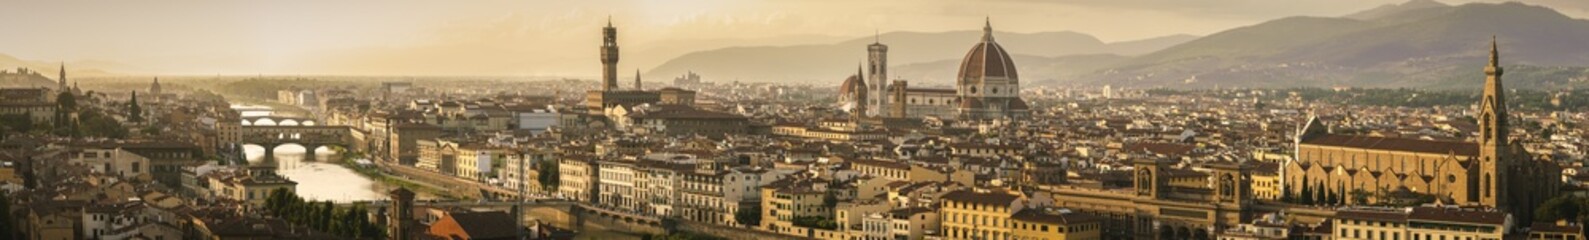 Magnificent panoramic view of Florence, Italy - 70492671